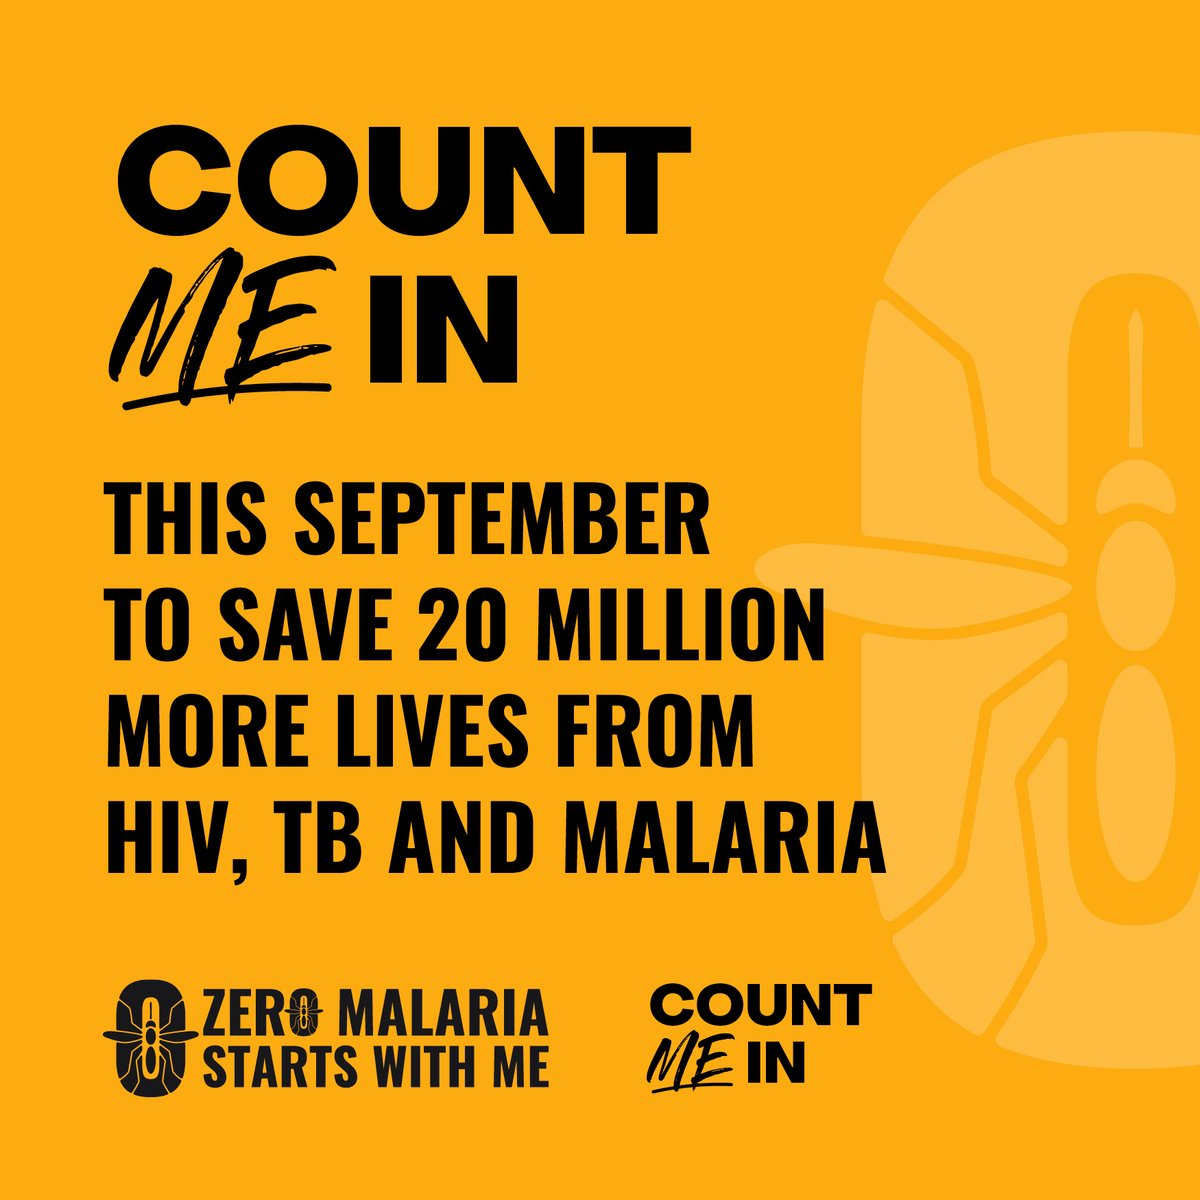 A fully replenished @GlobalFund will help save 20 million more lives from HIV, TB & malaria. Let's achieve the Replenishment target of at least $18bn to help drive economic growth and gender equality in affected countries. #FightForWhatCounts #VoixEssentiELLE